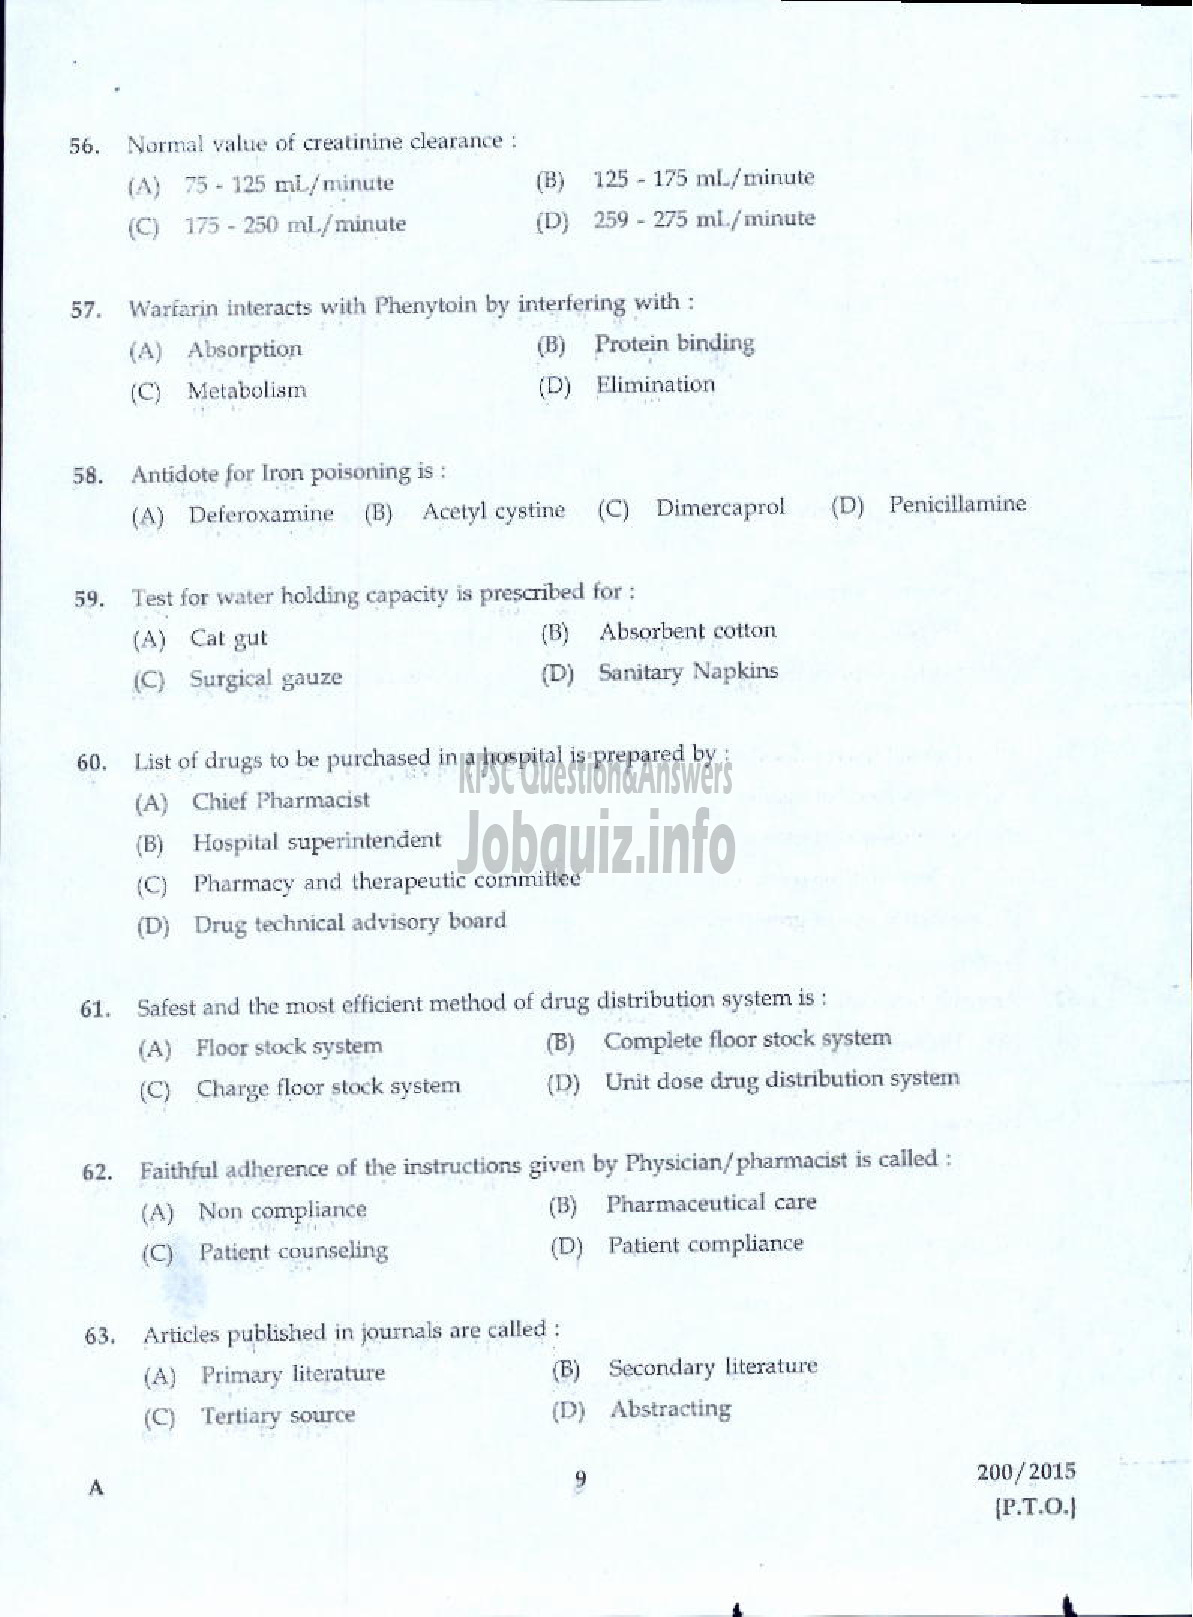 Kerala PSC Question Paper - PHARMACIST GR II HEALTH SERVICES-7